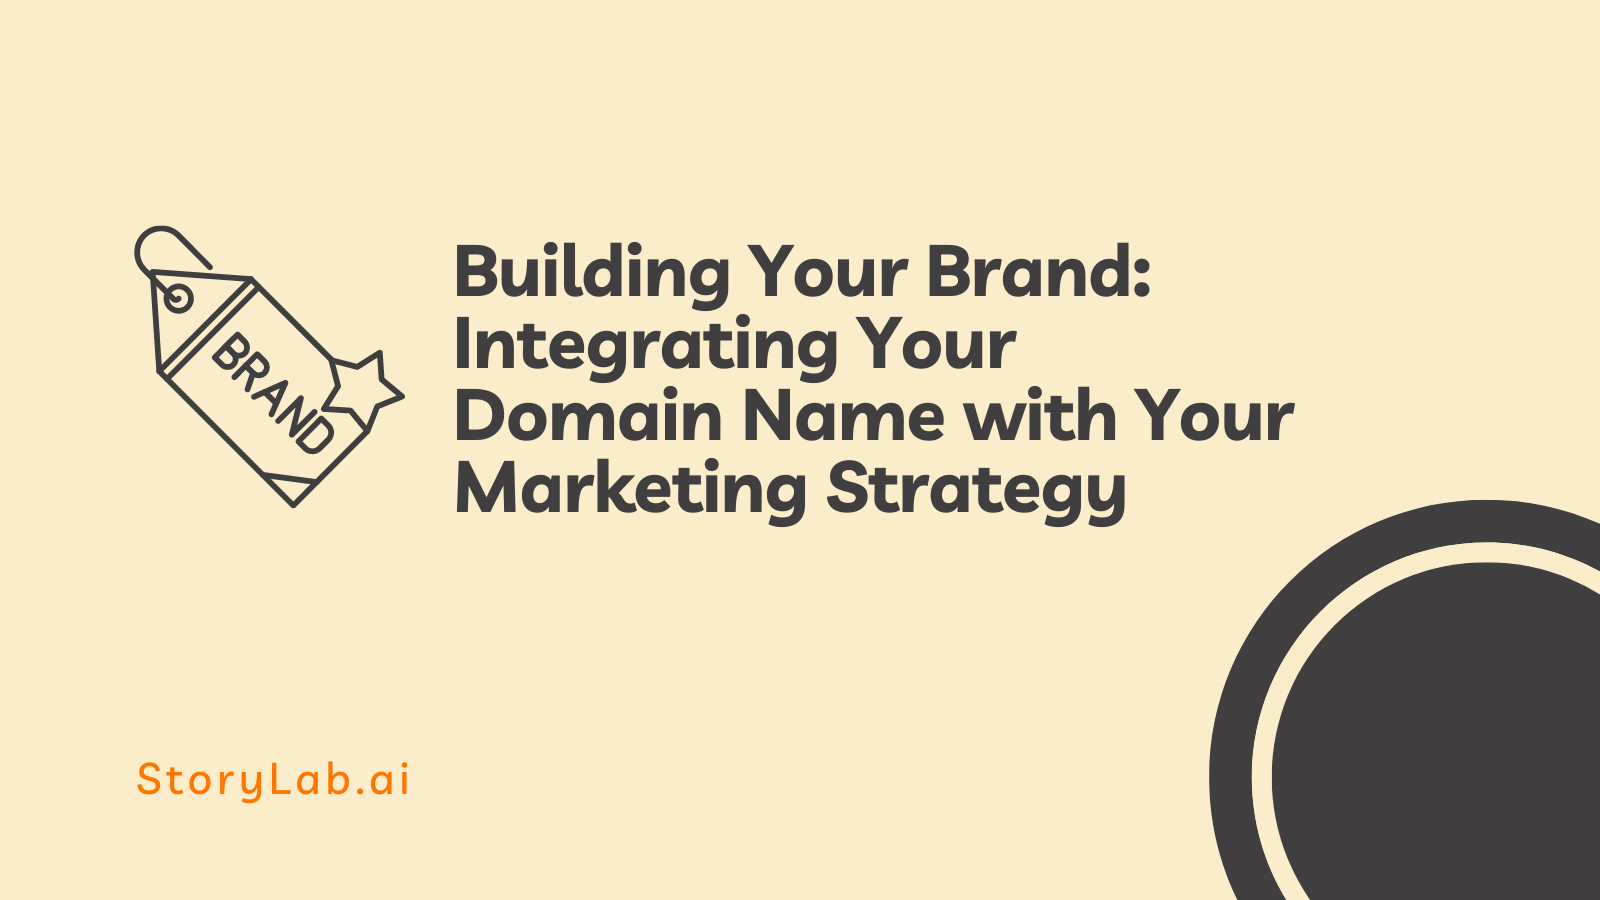 Building Your Brand Integrating Your Domain Name with Your Marketing Strategy